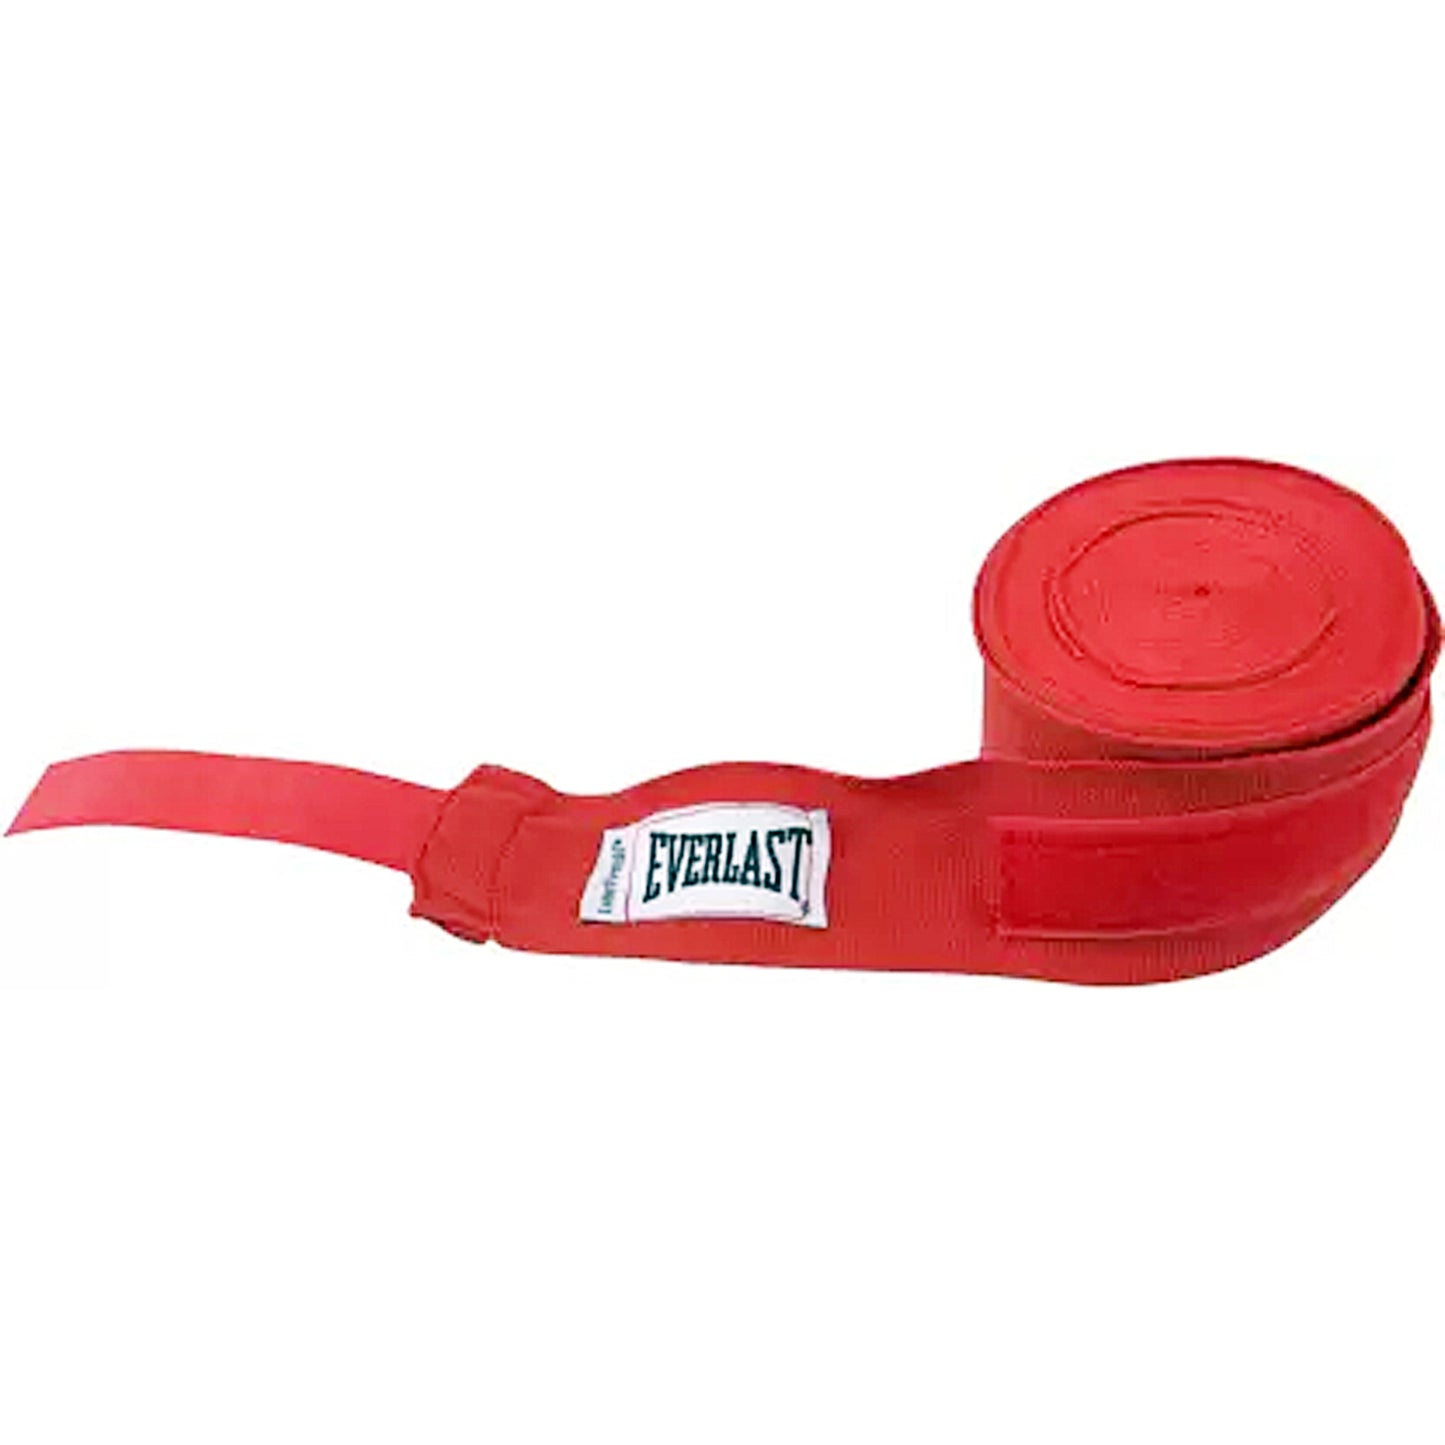 Everlast 4457 Pro Style Boxing Hand Wrap, 120 Inches - Red - Best Price online Prokicksports.com